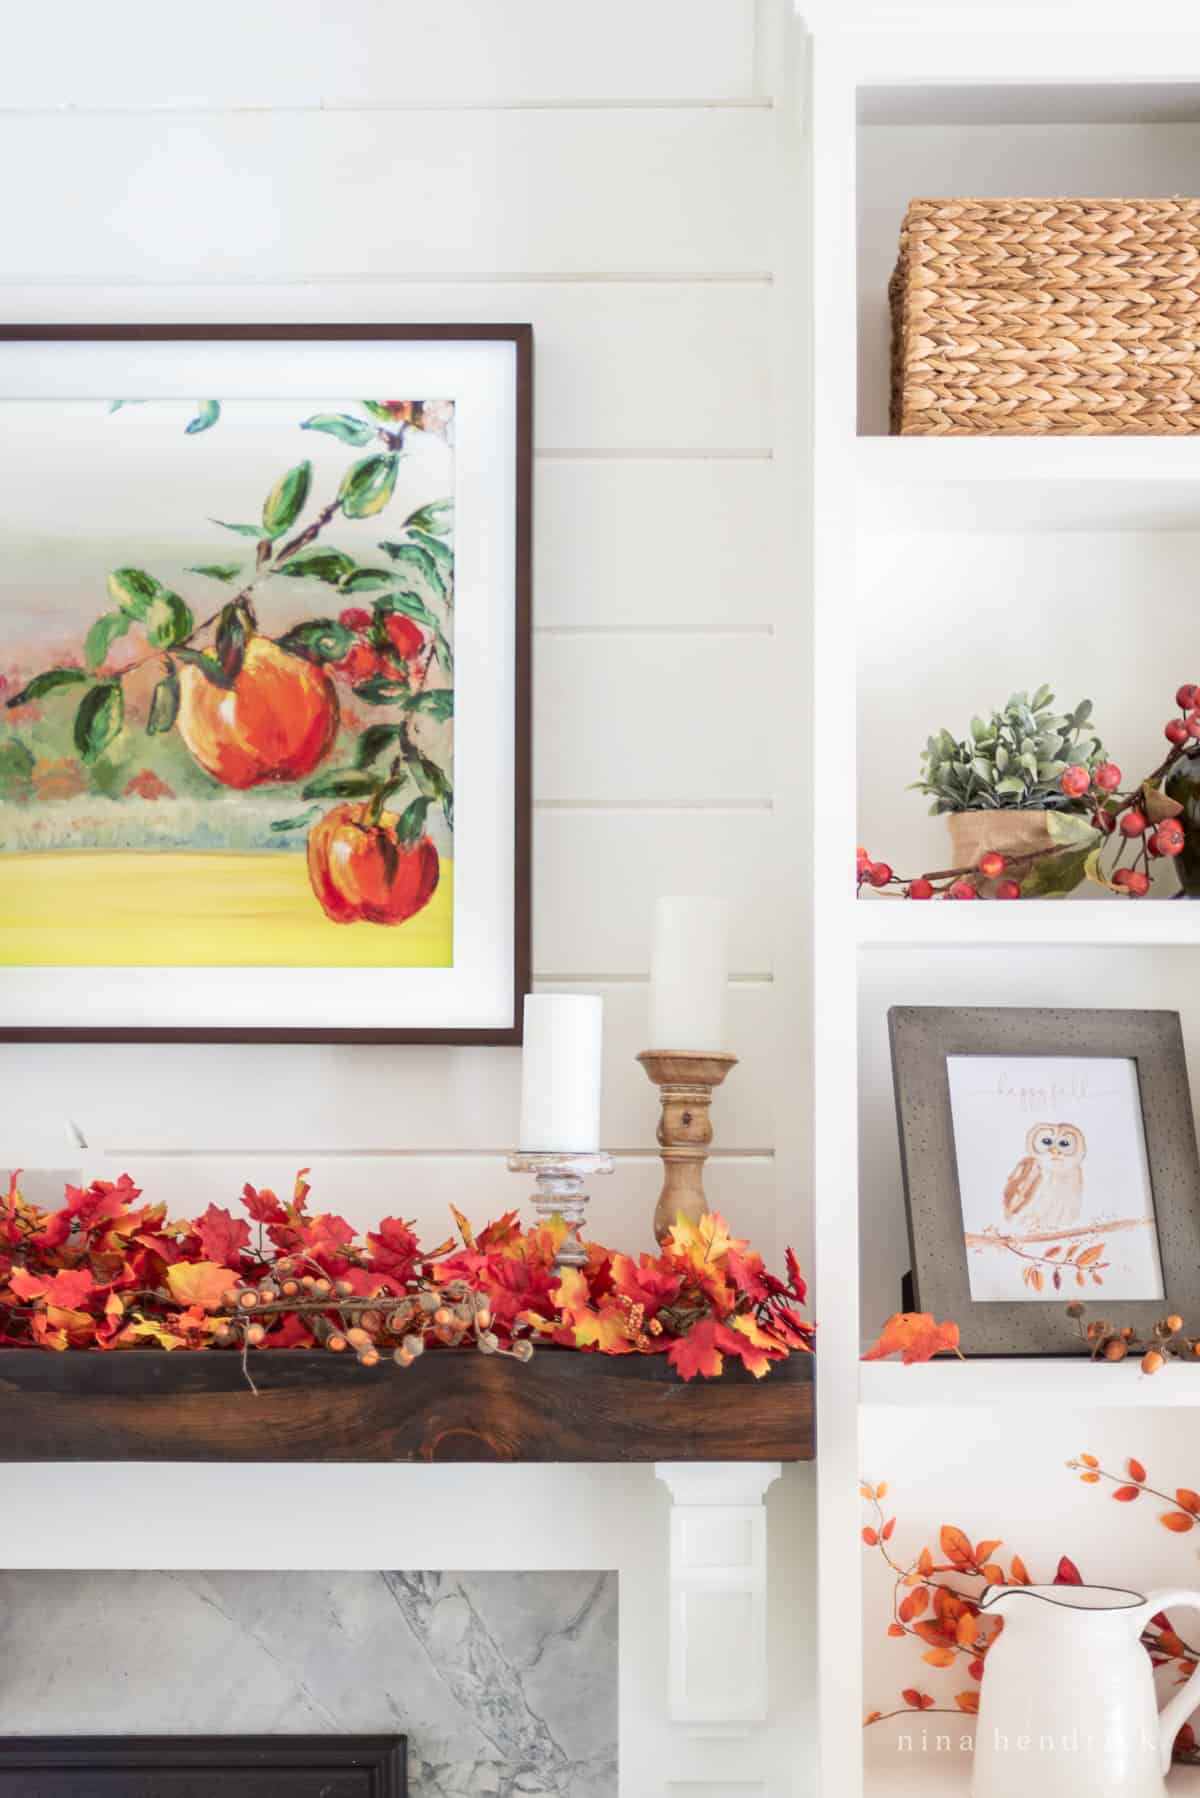 Close-up of a wooden mantel decorated for fall with bright autumn colors and a painting with apples